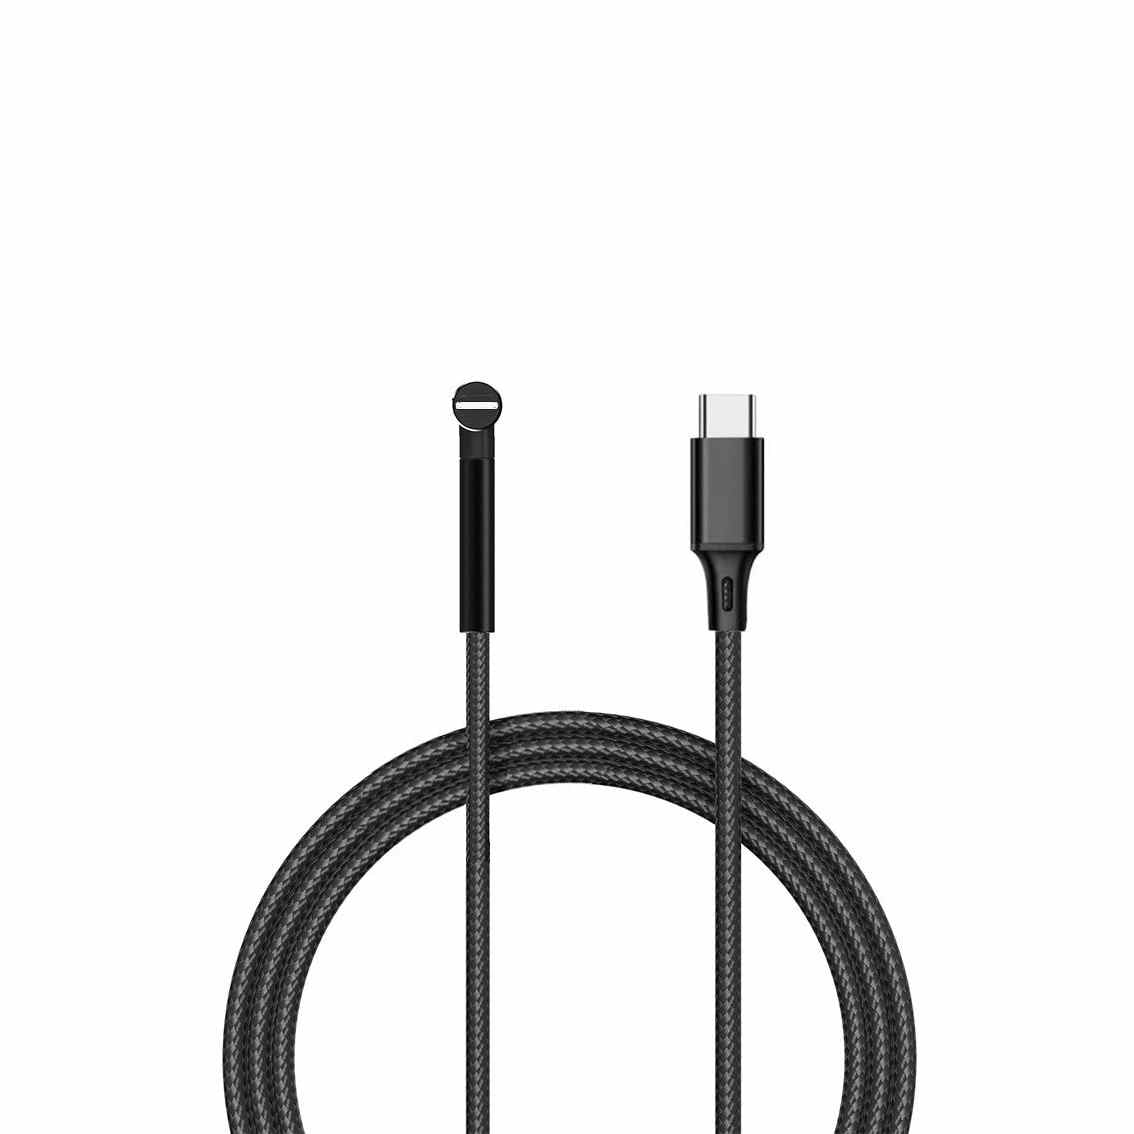 Lightning Charging Cable with a Stand for iPhone 14, 13, 12, 11, XR, X, 8, Airpods, iPads